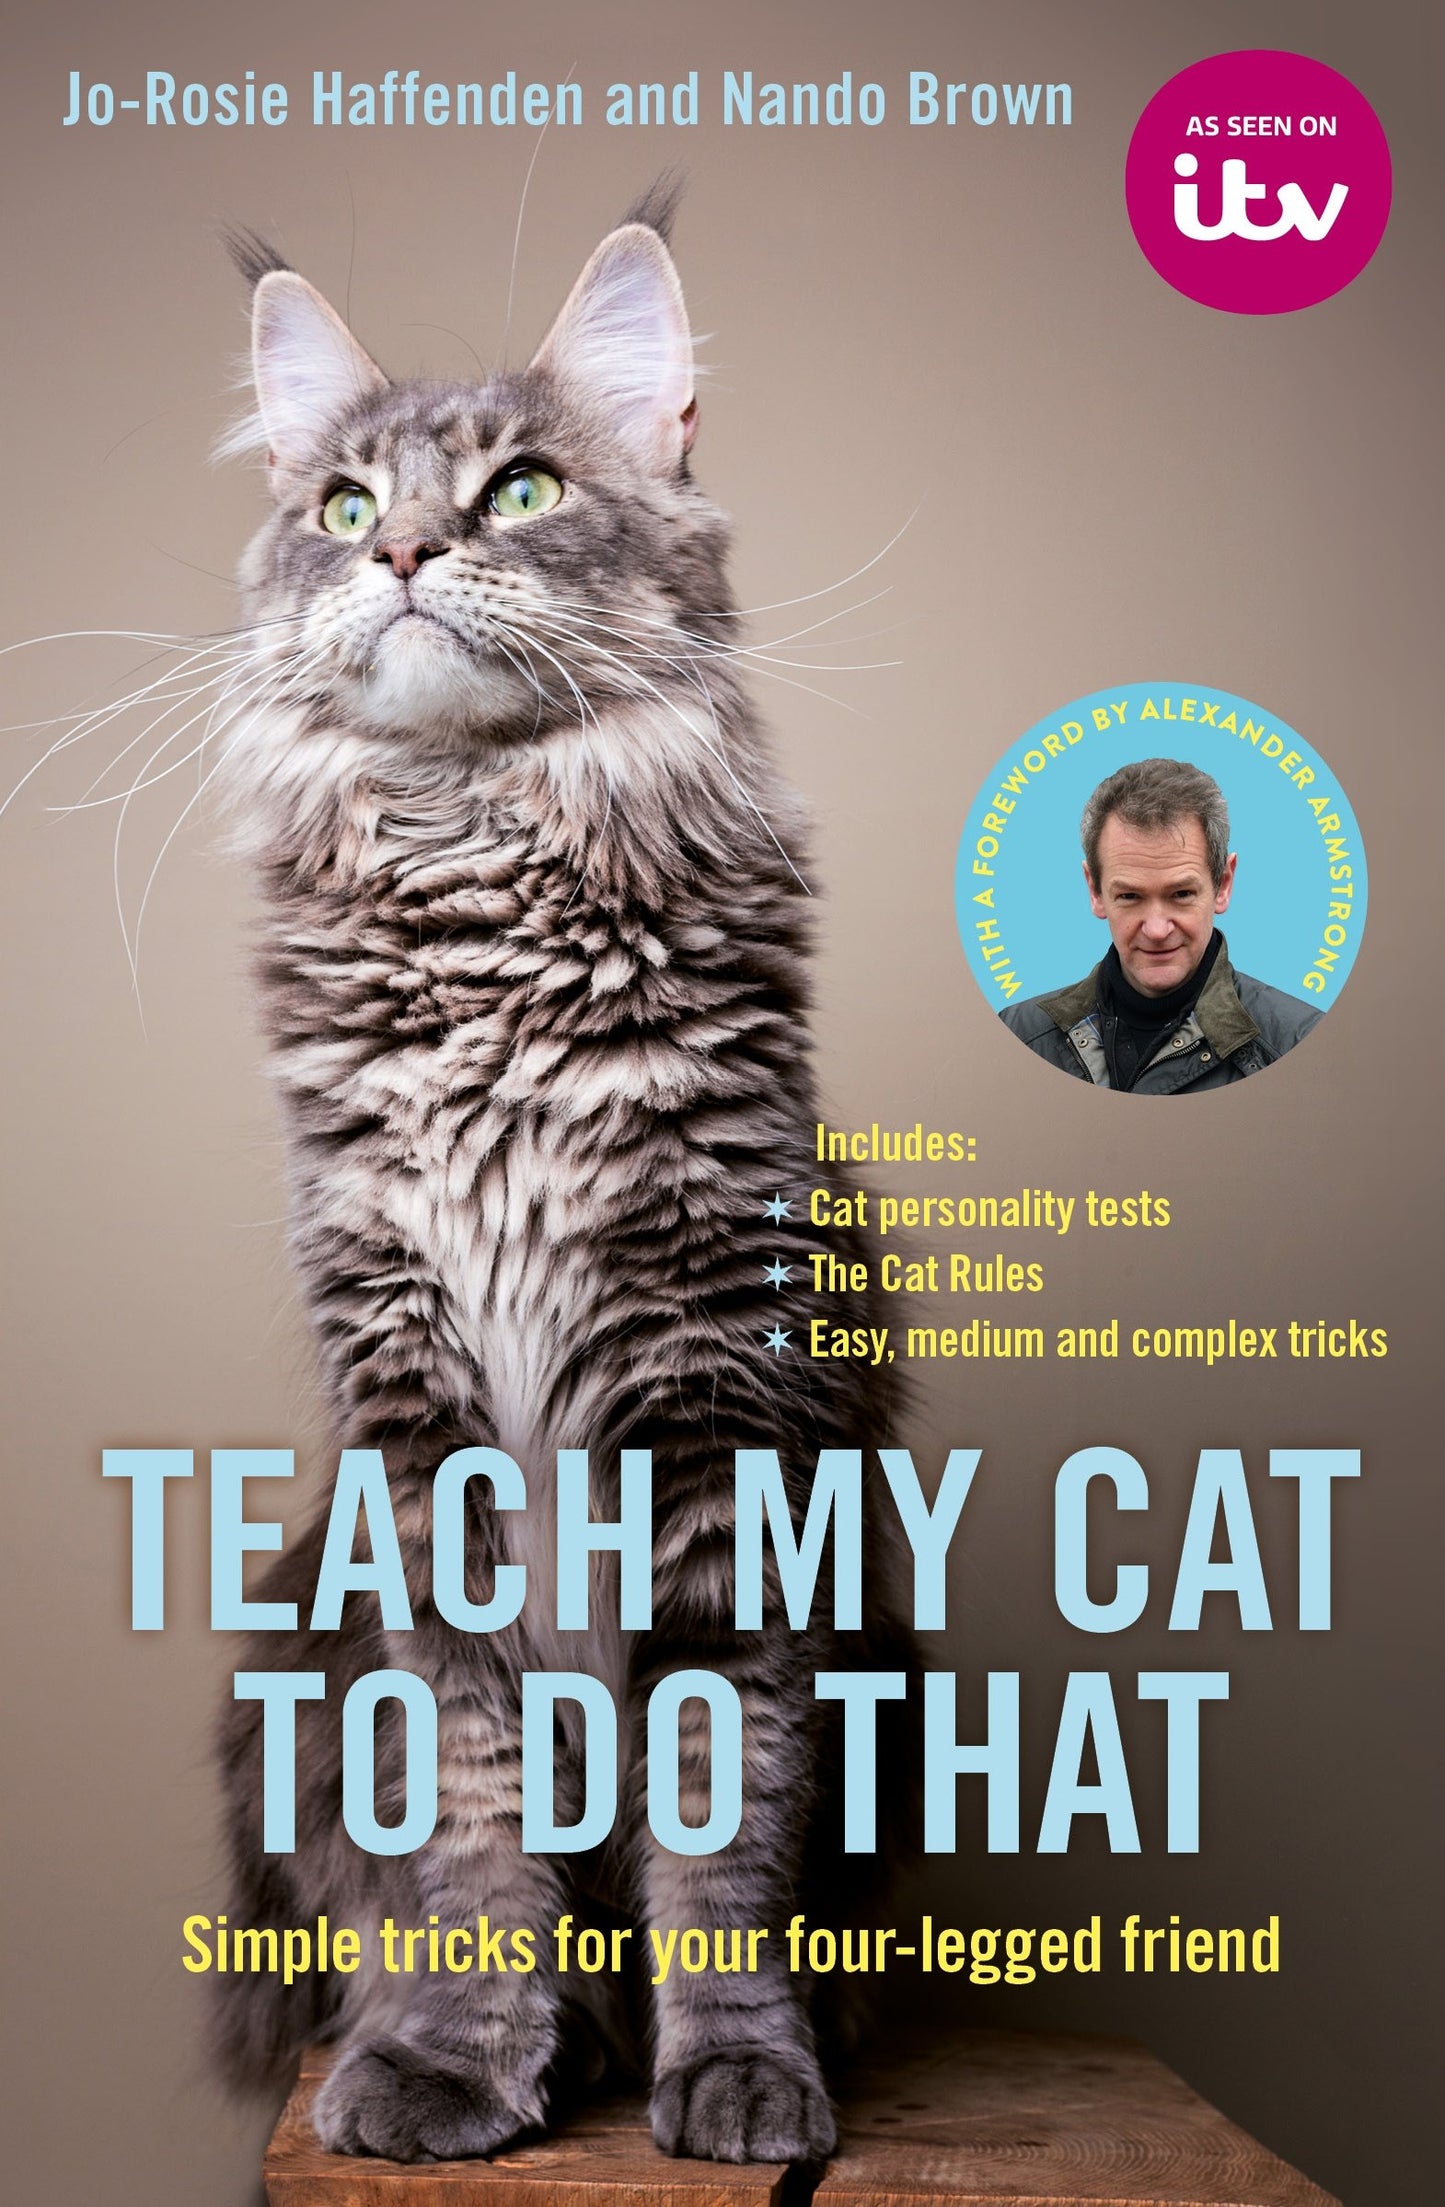 Teach My Cat To Do That by Jo-Rosie Haffenden and Nando Brown